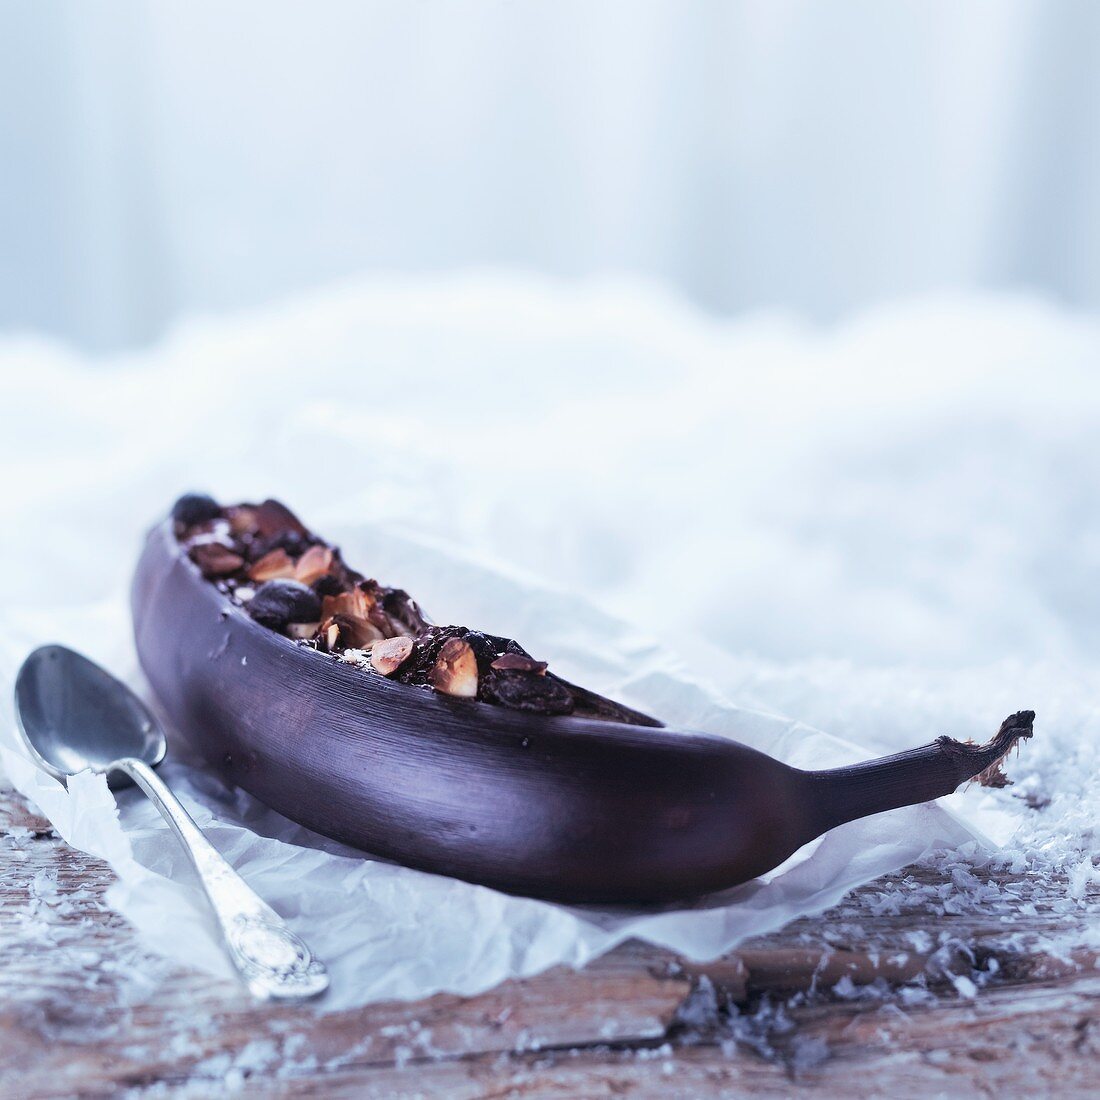 A banana baked in its skin topped with nuts and chocolate